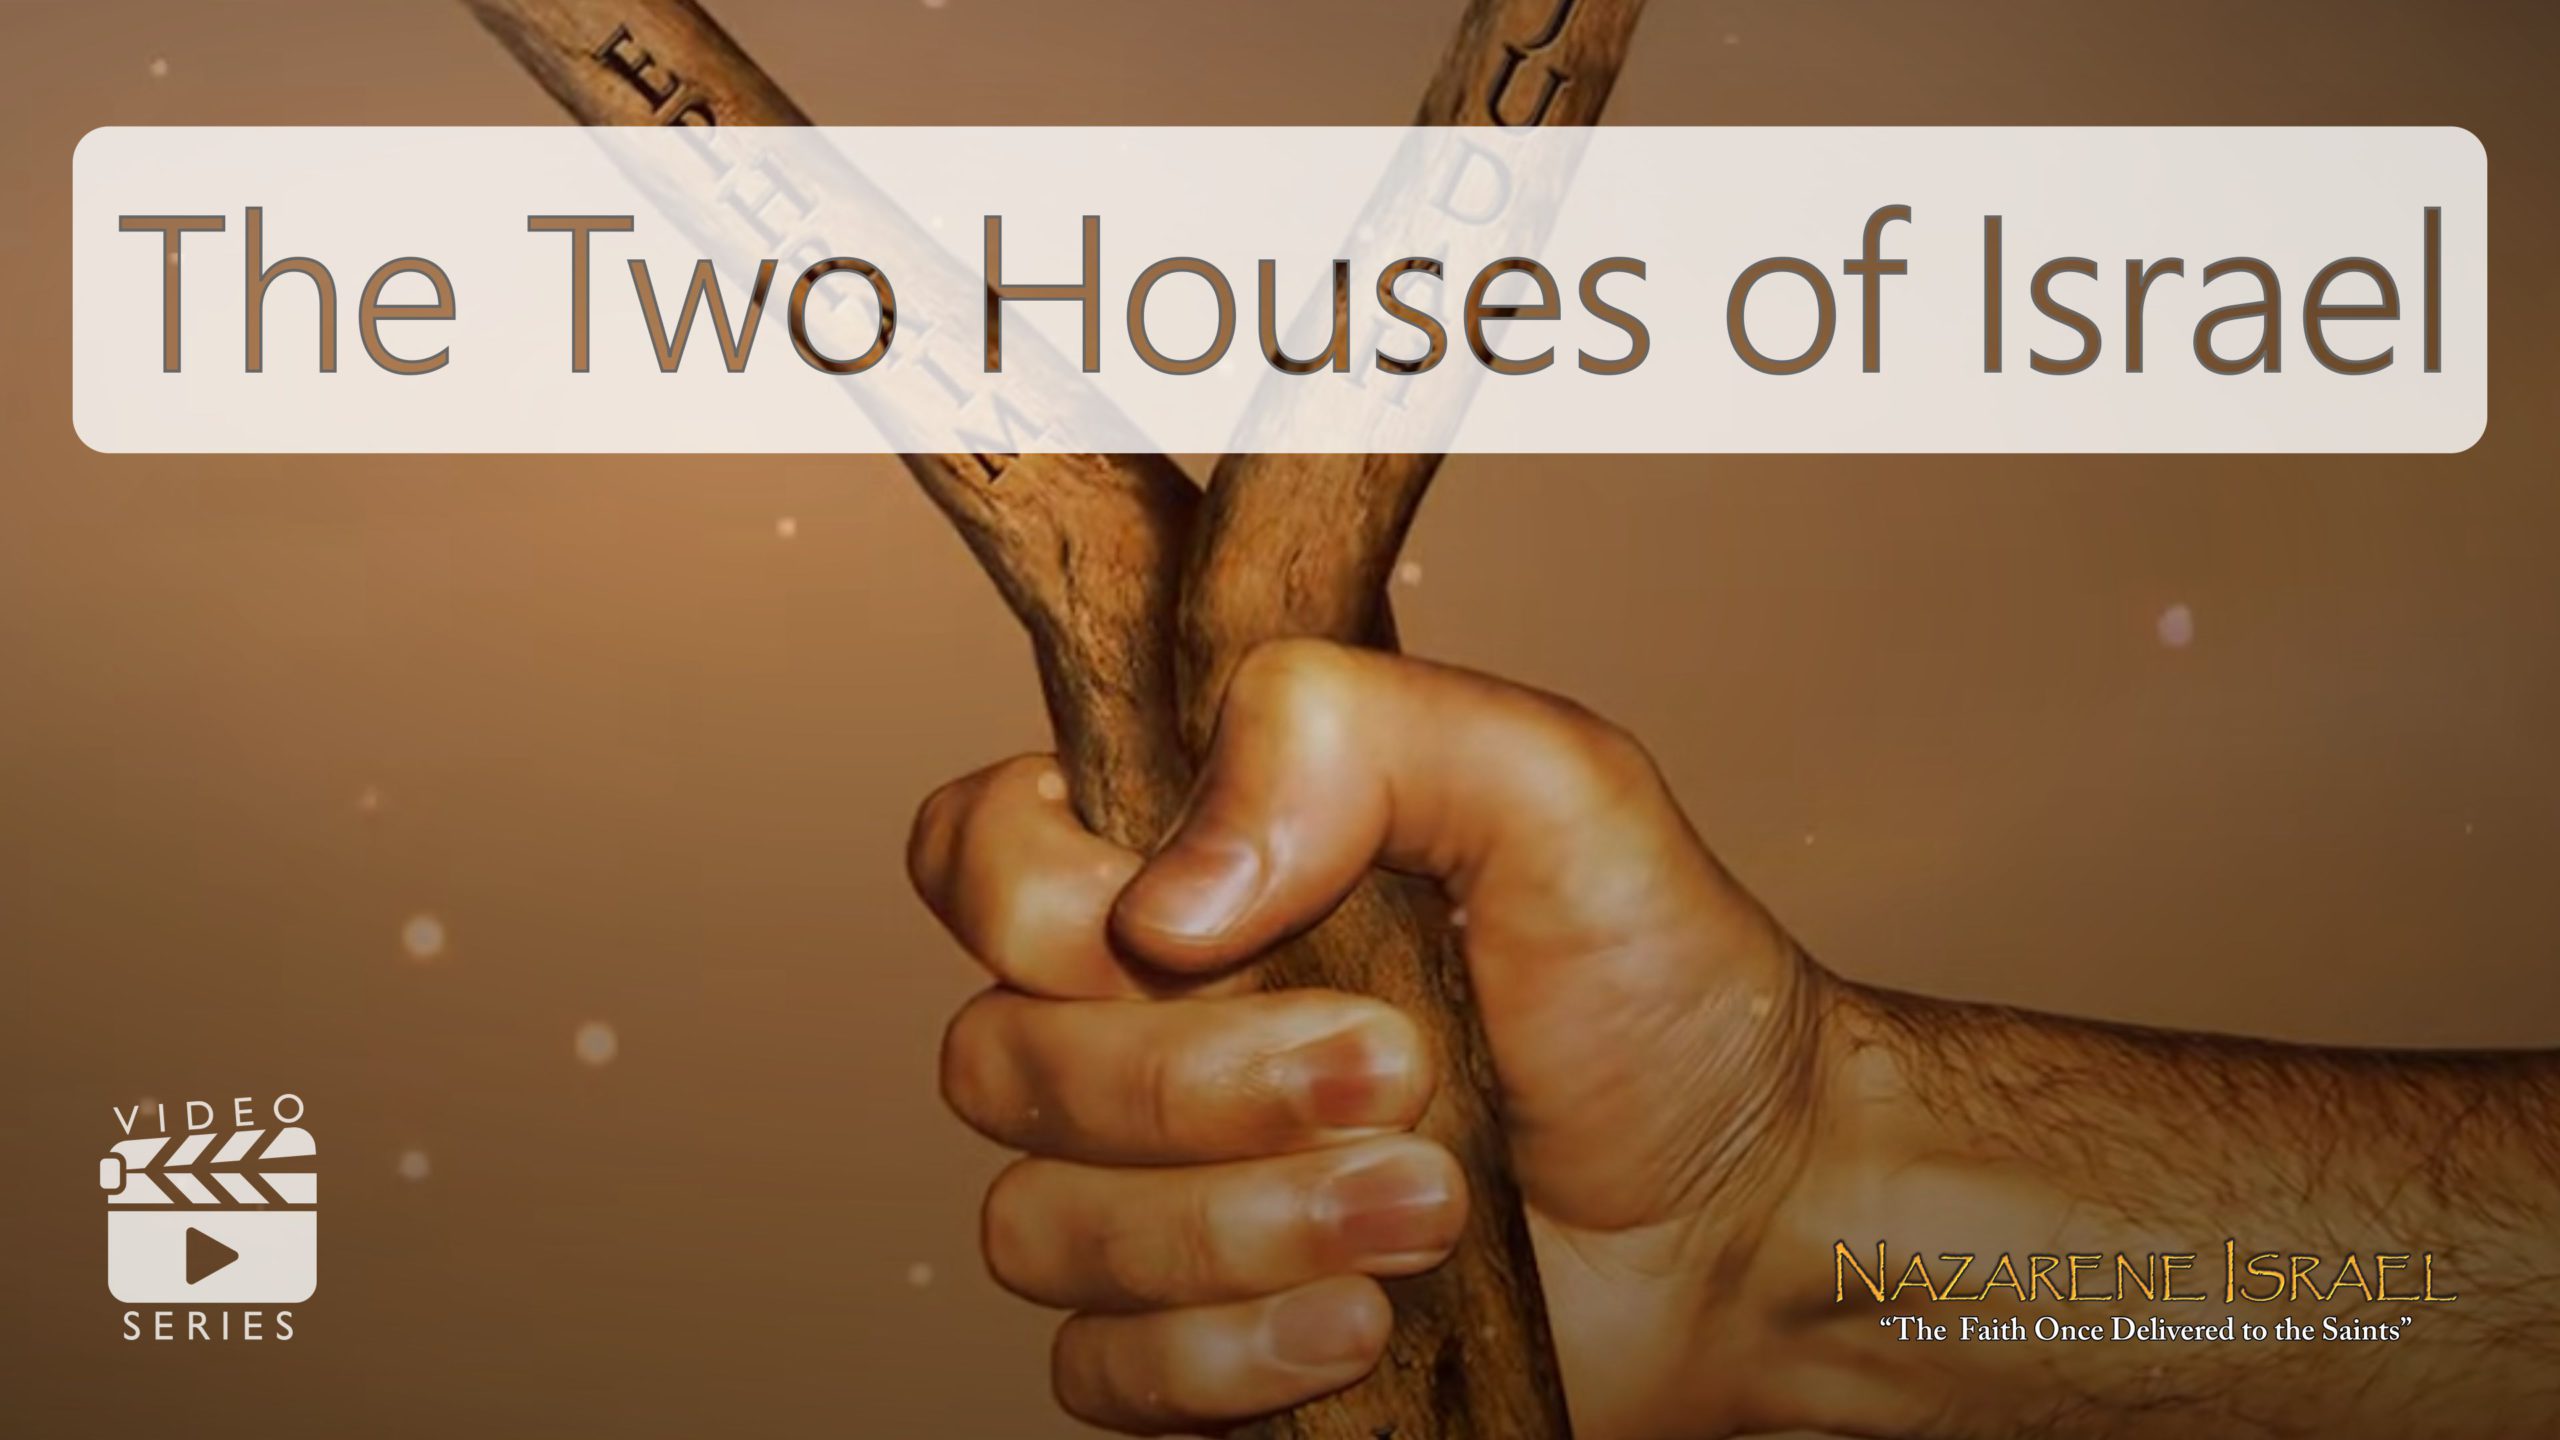 The Two Houses of Israel